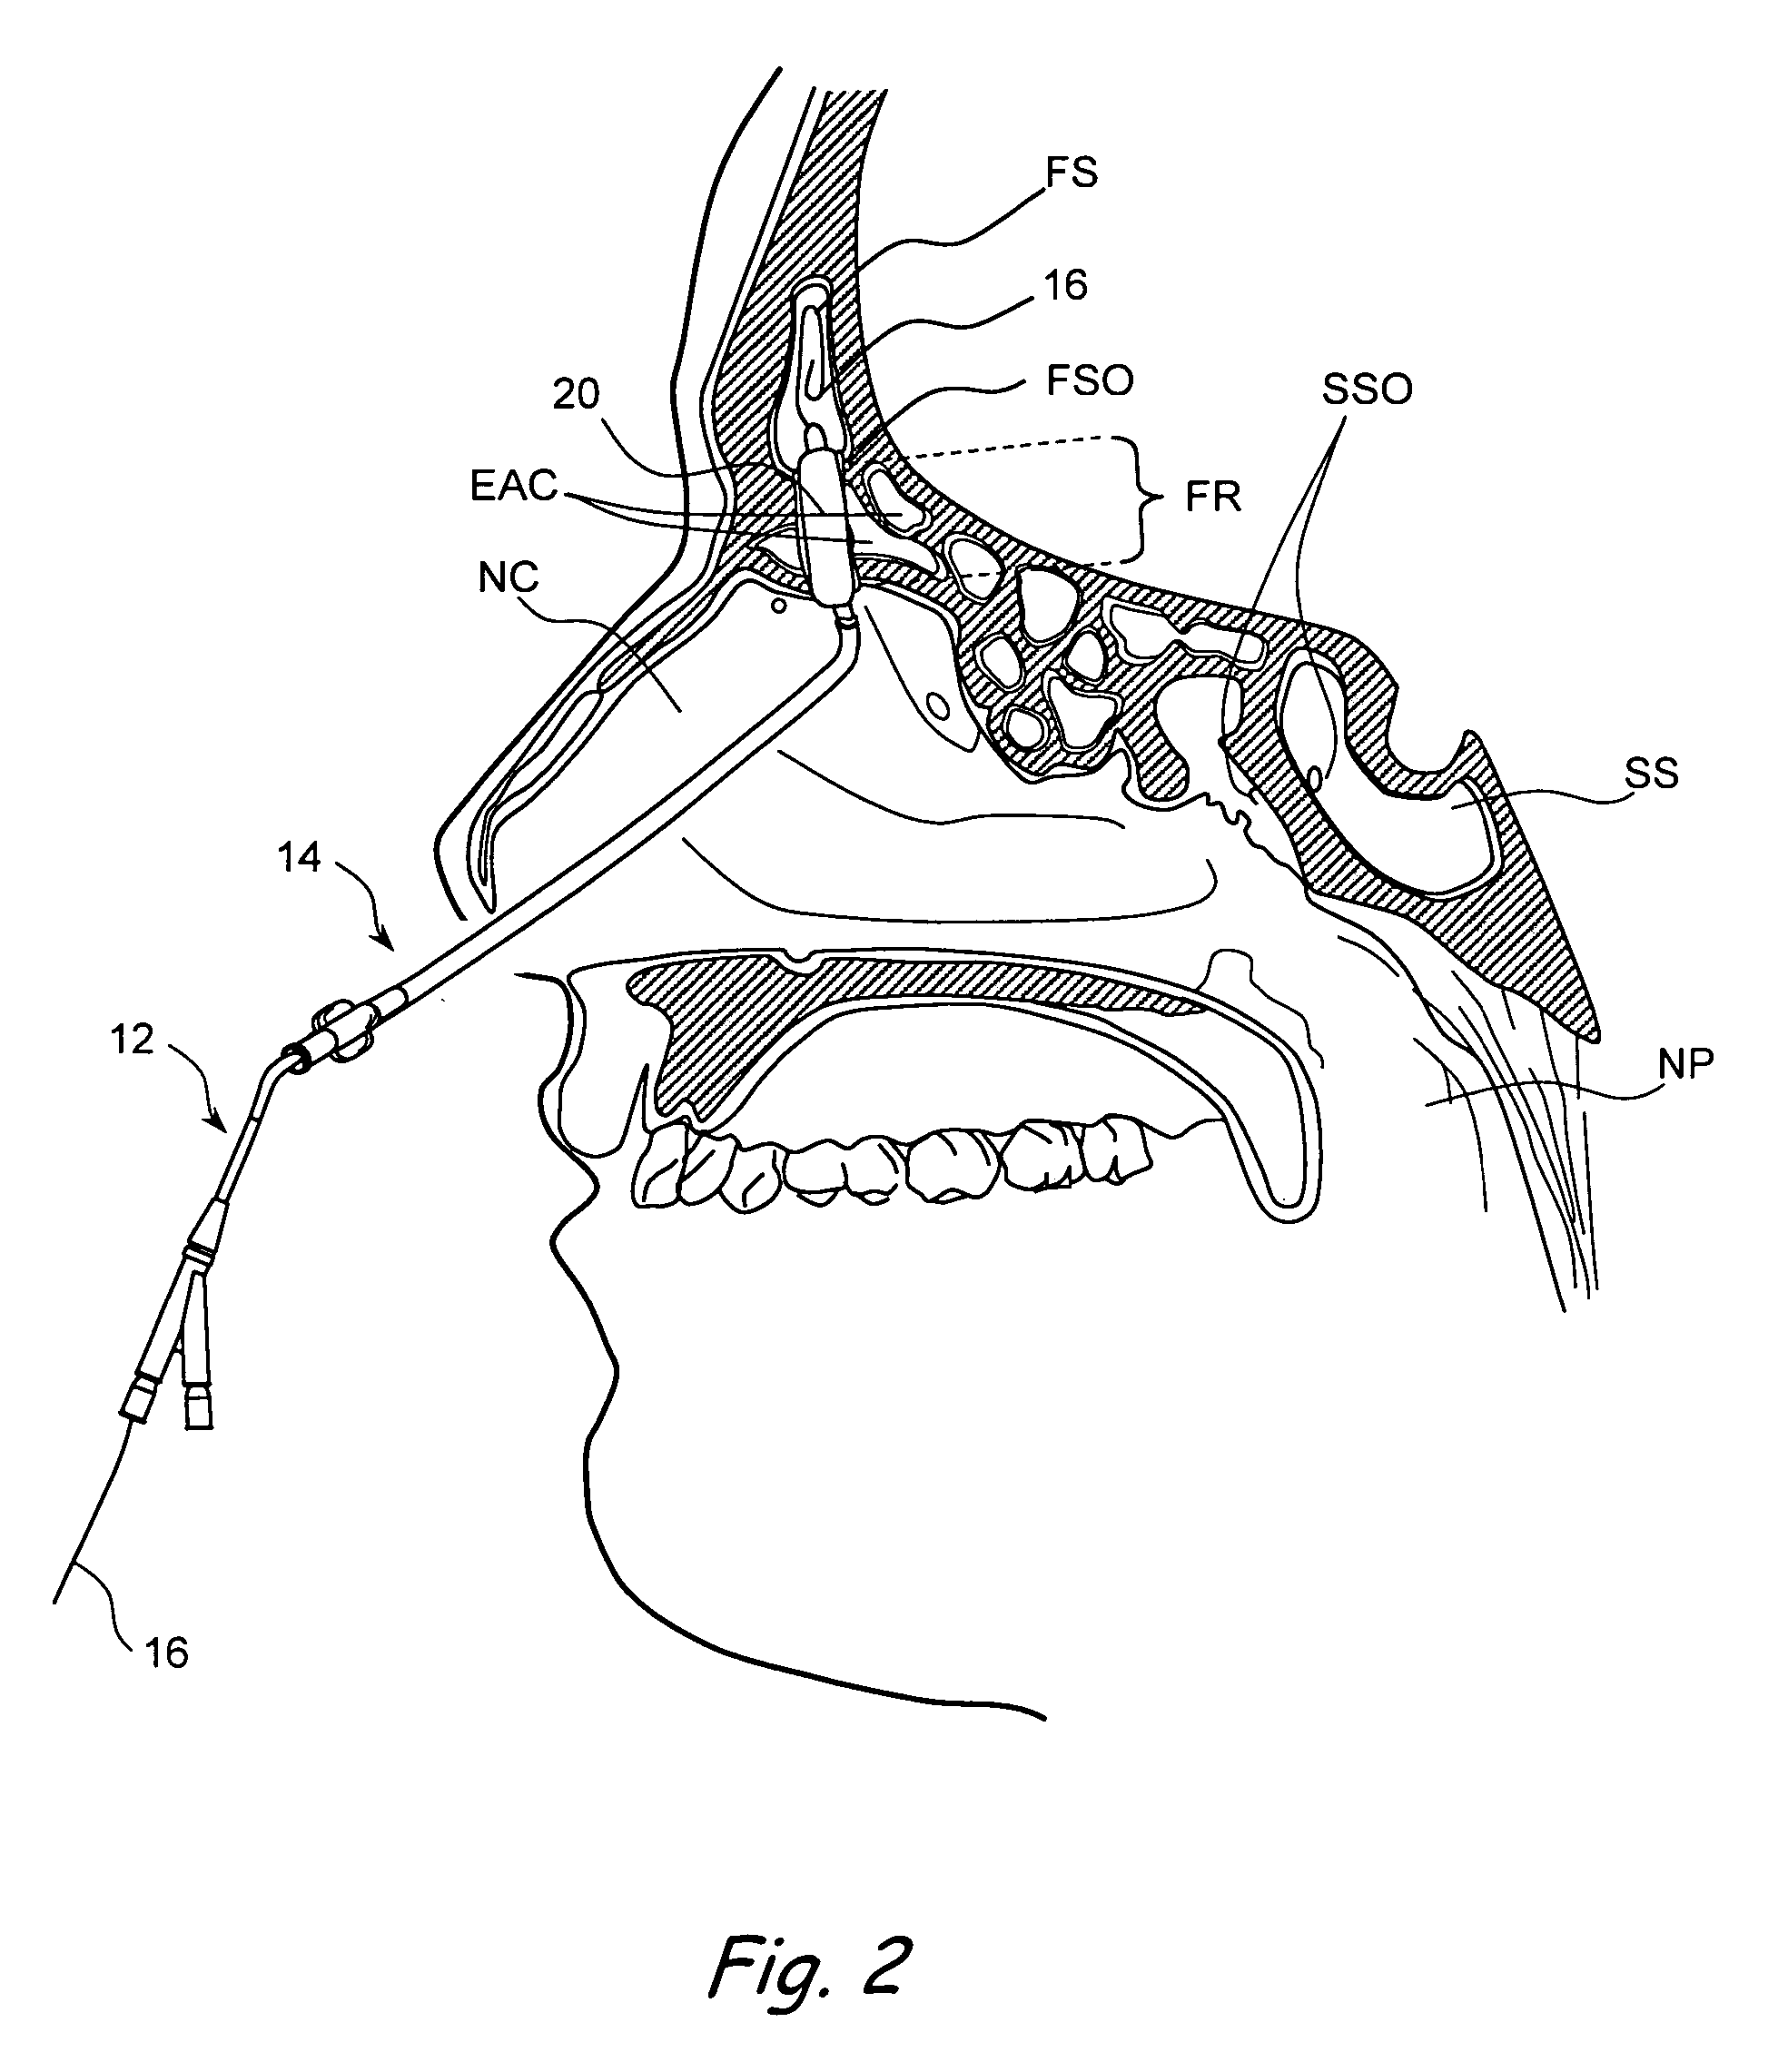 Devices, systems and methods useable for treating frontal sinusitis